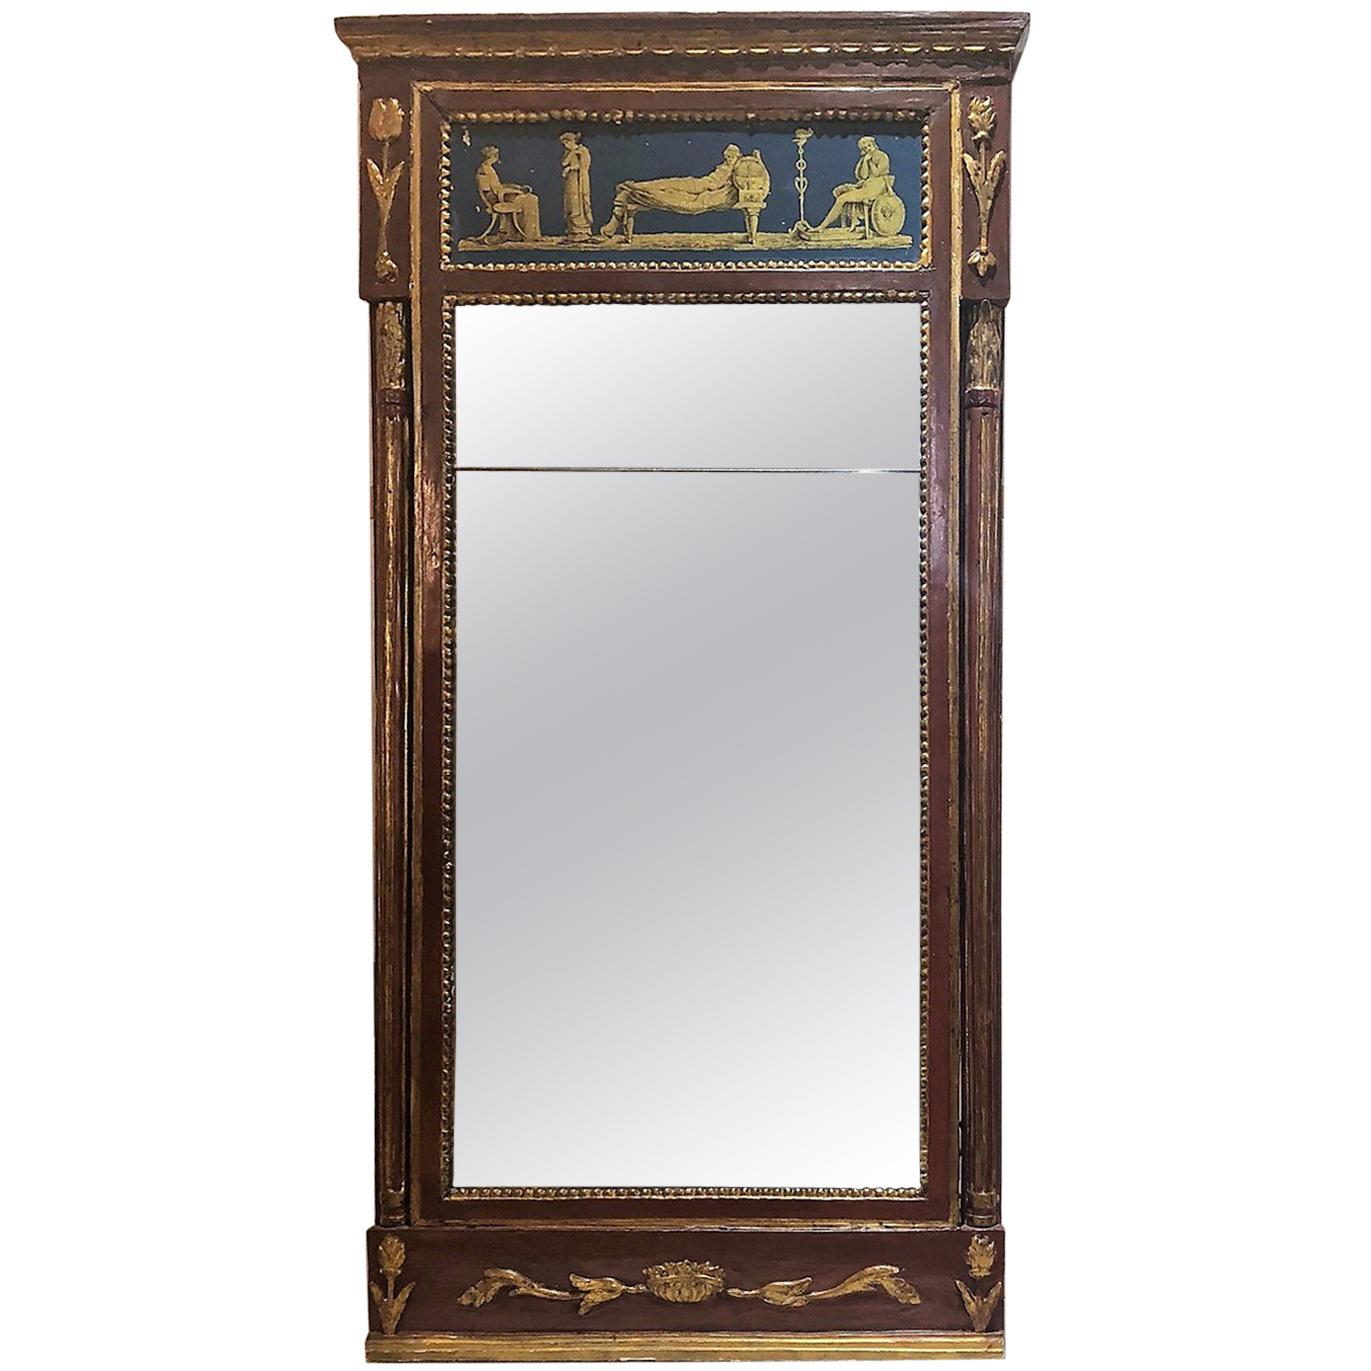 Antique Hand-Painted Mirror with Silver Leaf Glass